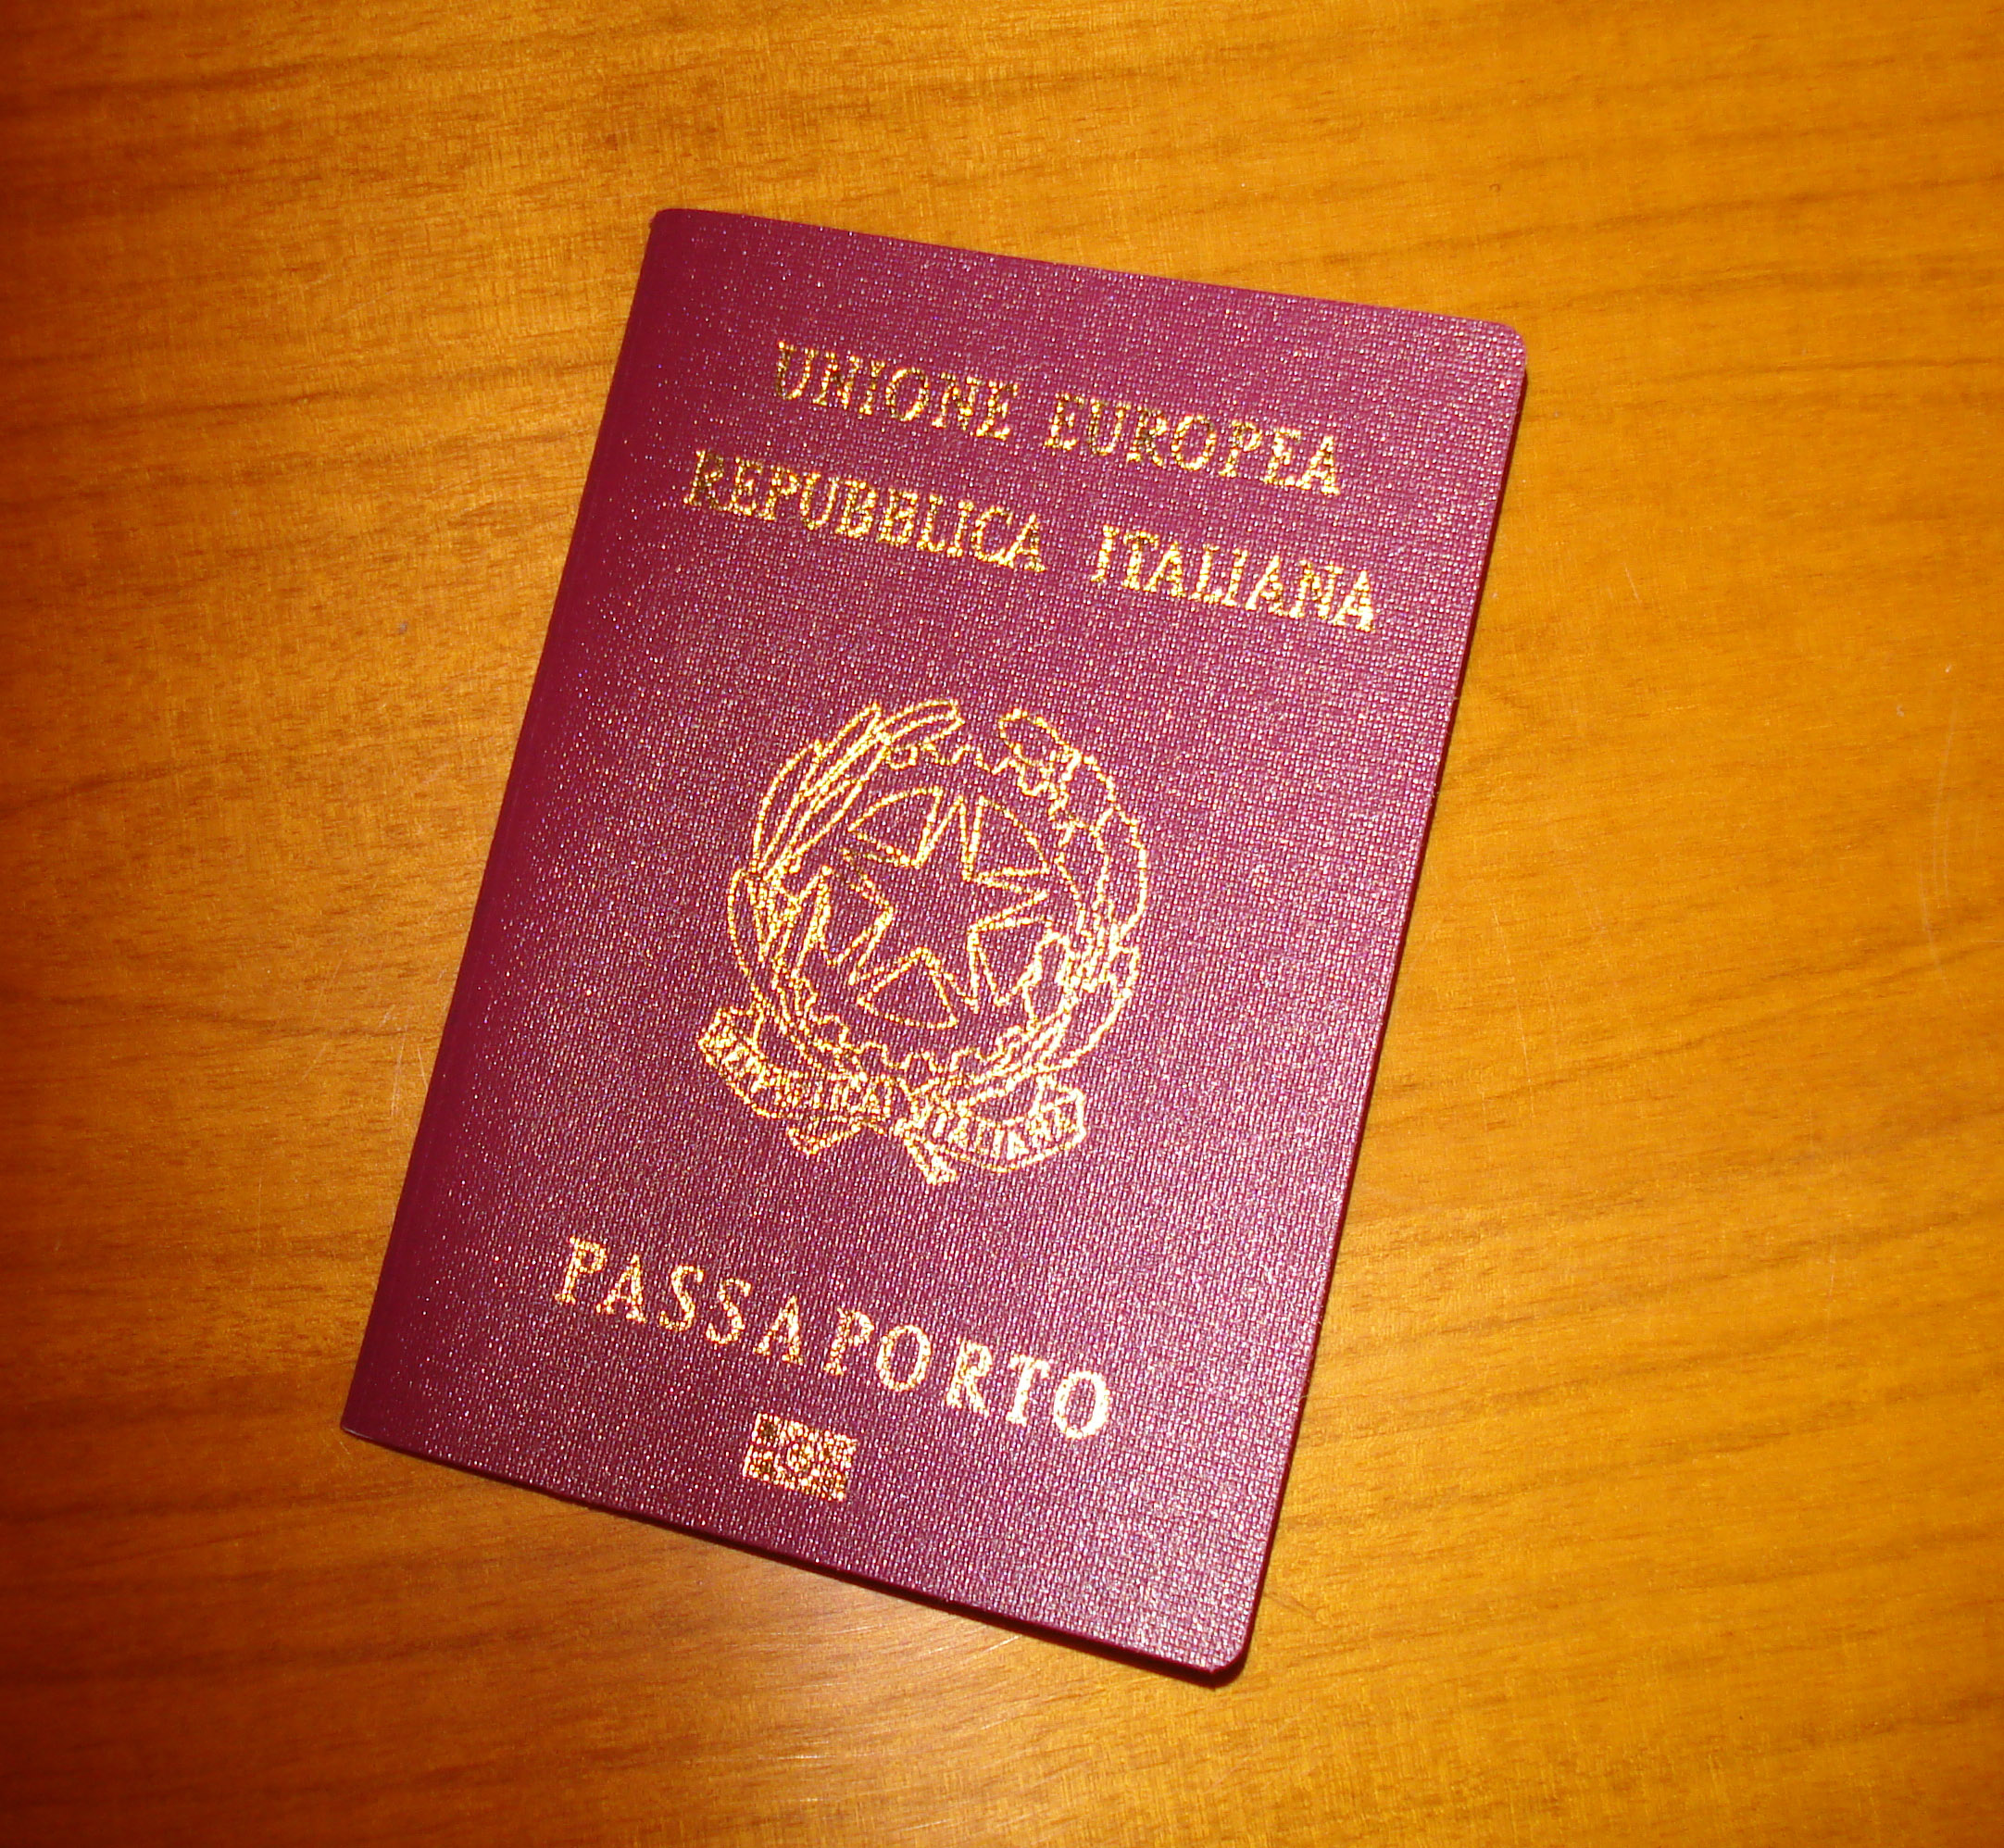 Vietnam Reissue E-visa For Italian After March 15, 2022 | Vietnam Entry Requirements For Italian 2022